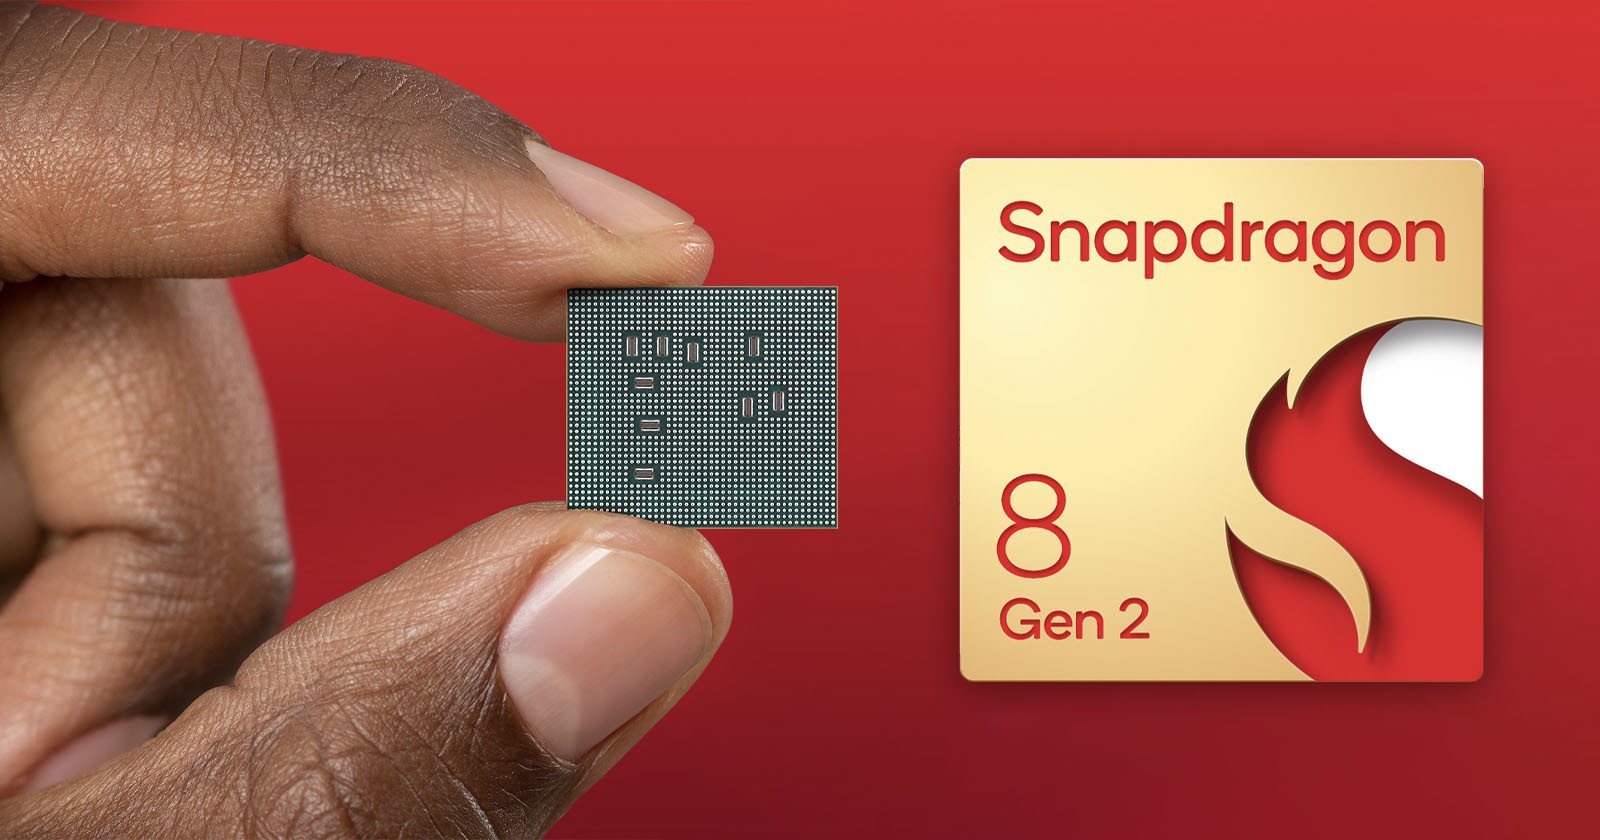 Nothing is Stopping Camera Makers from Using a Snapdragon Chip